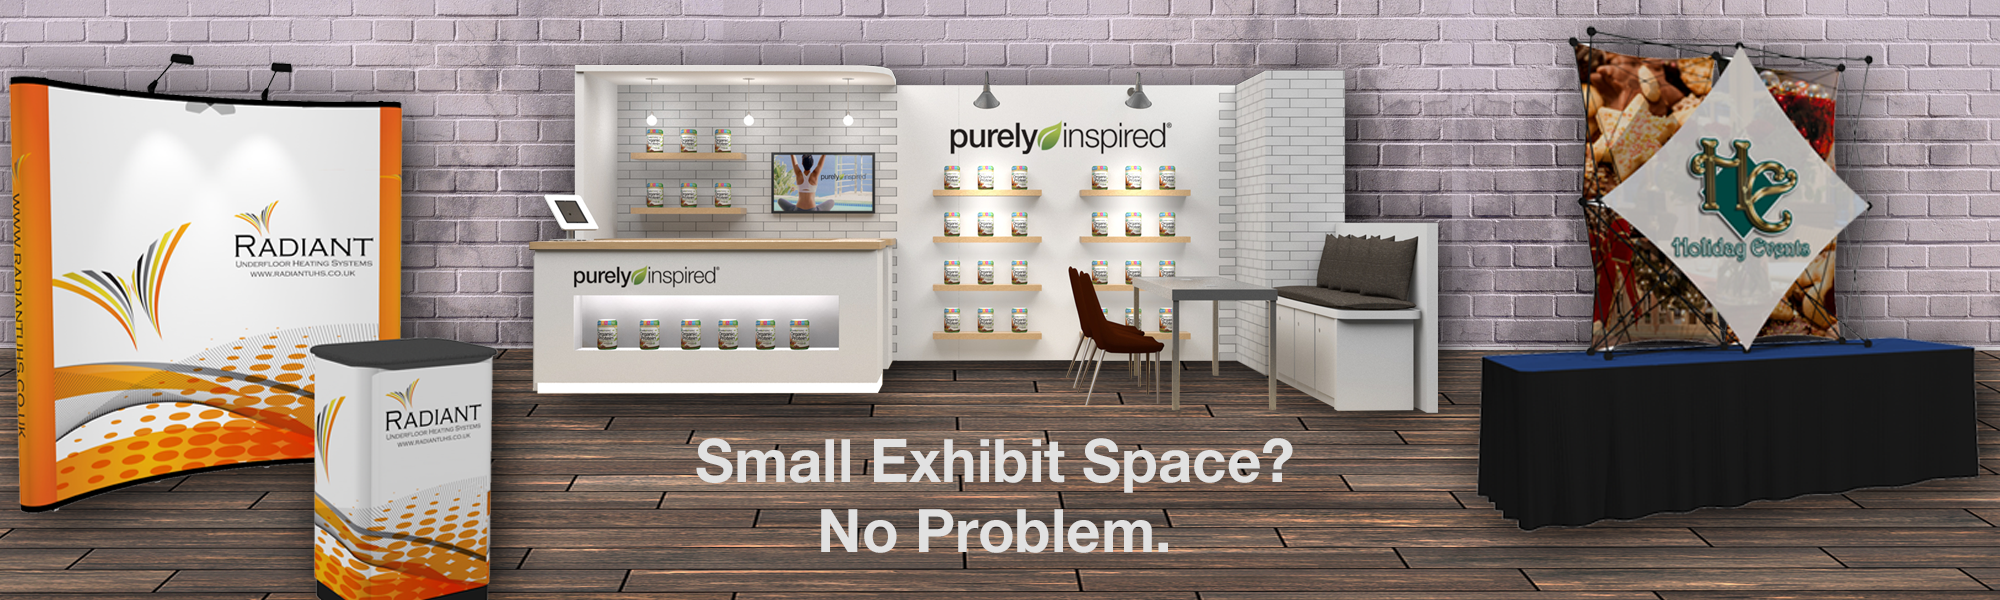 Maximizing Small Booth Spaces Through Design and Display